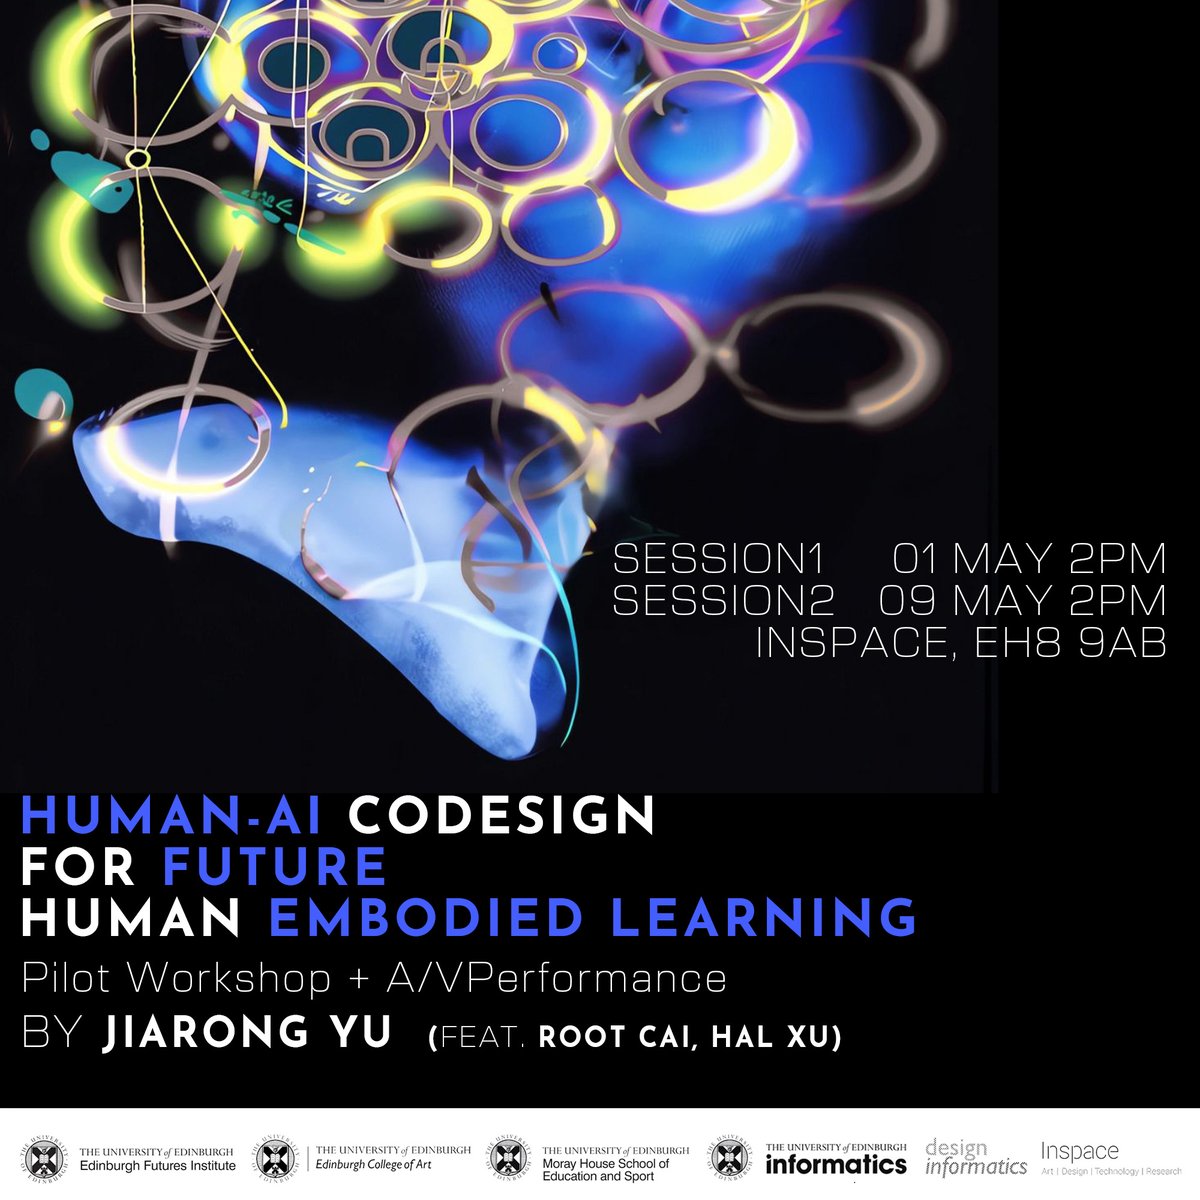 There's still time to register for Session 2 of this event happening tomorrow! Organised by @eca_edinburgh PhD student Jiarong Yu. 🤖 Human - AI Codesign For Future Human Learning 🗓️ 9 May 🕑 2-4pm 📍@InspaceG Book ▶️ edin.ac/3Uwausf